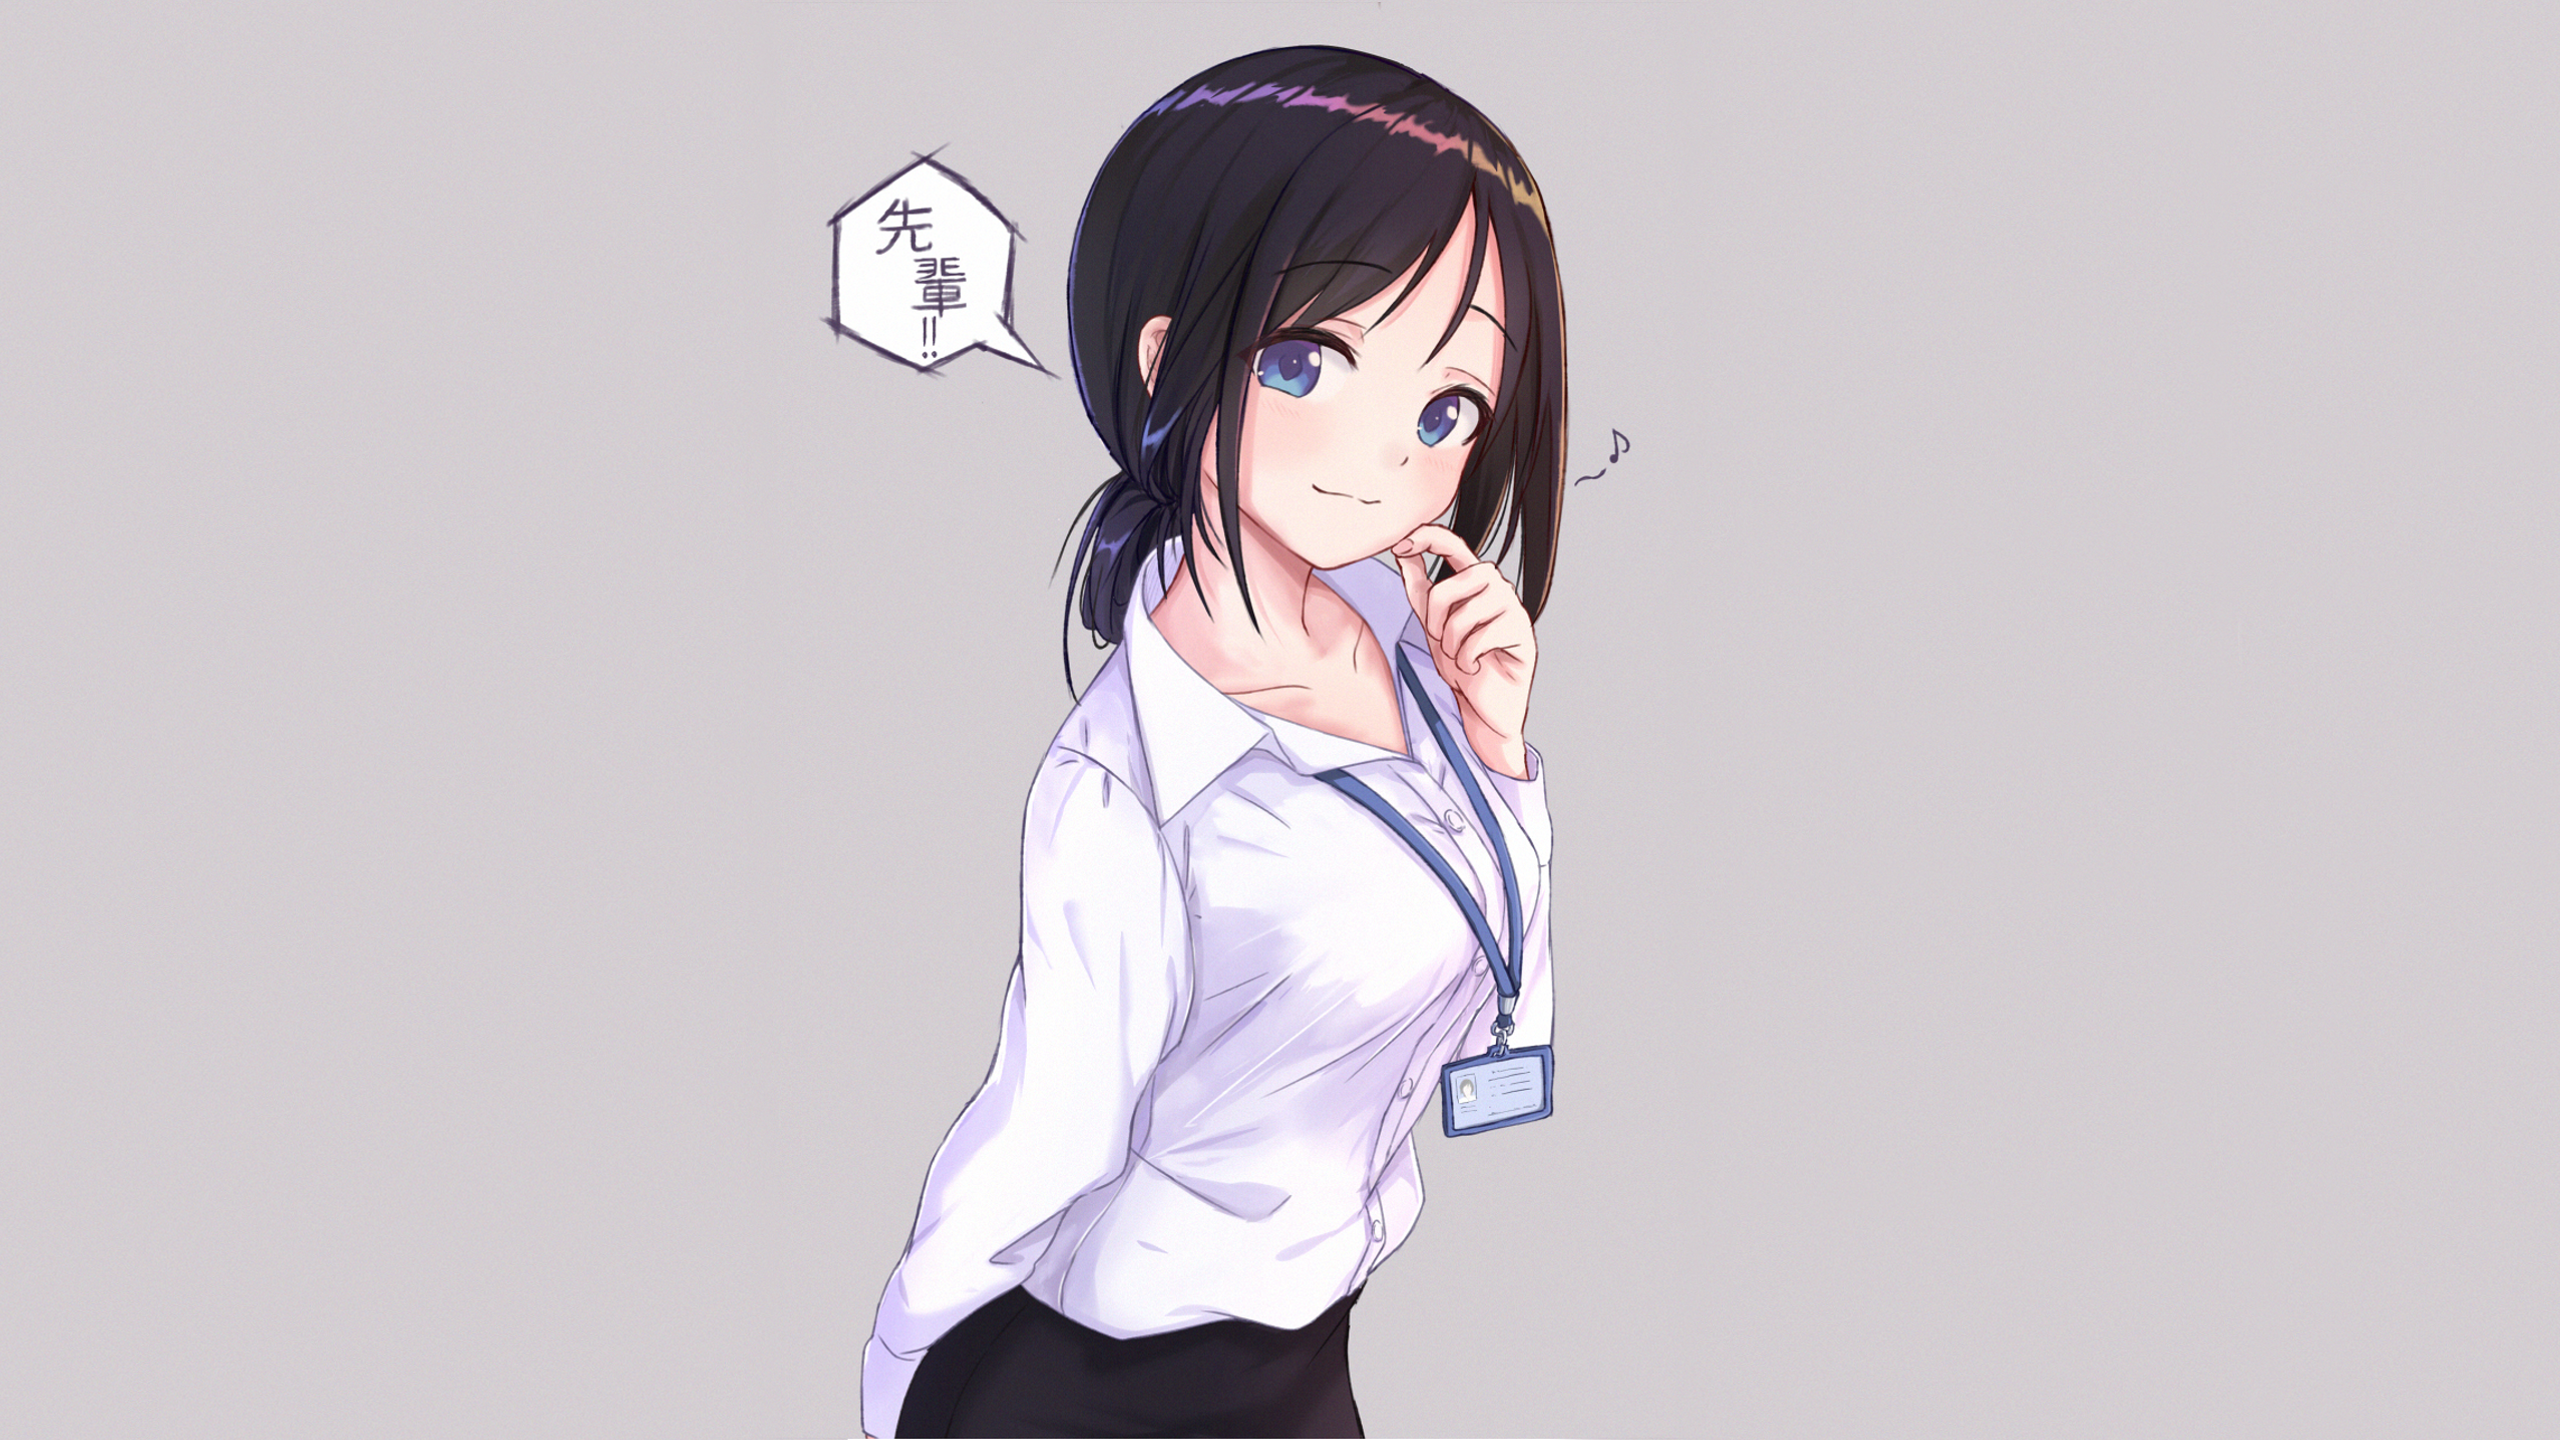 Anime Anime Girls Original Characters Speech Bubble Kanji Looking At Viewer Smiling Simple Backgroun 2560x1440